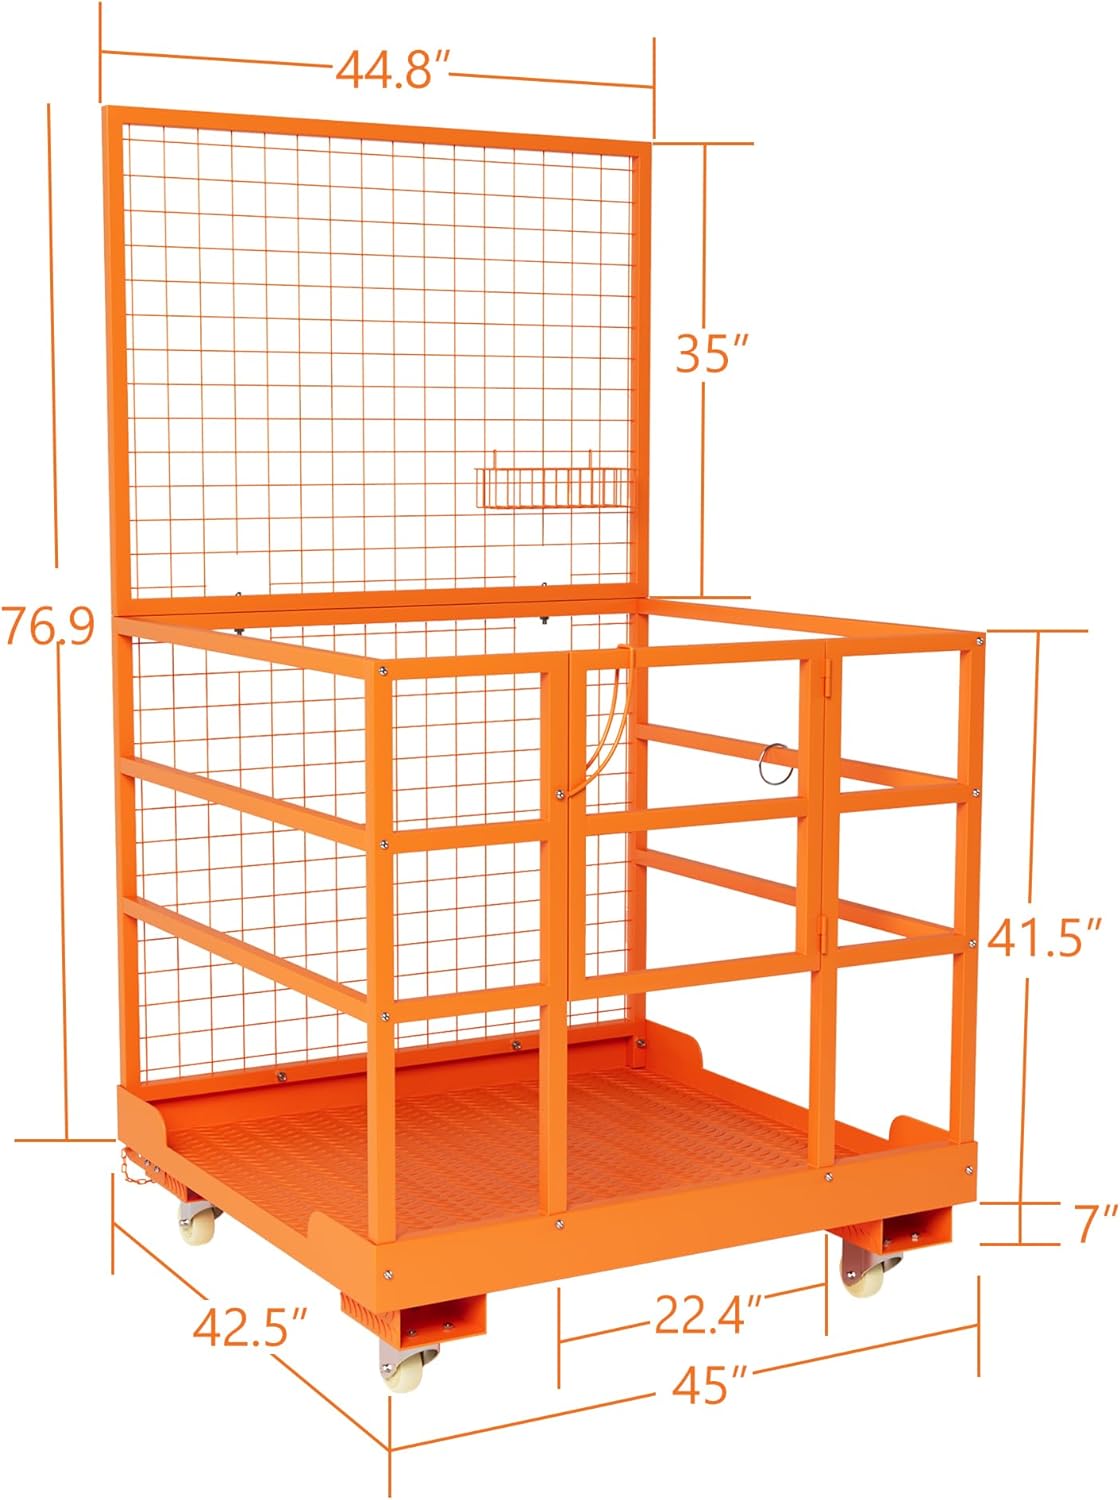 43x45 Inches Forklift Safety Cage,1800LBS Capacity Forklift Man Basket Work Platform with Guardrail and Safety Lock for 1-3 People,2 Wheels with Brakes and 2 Wheels Without Brakes